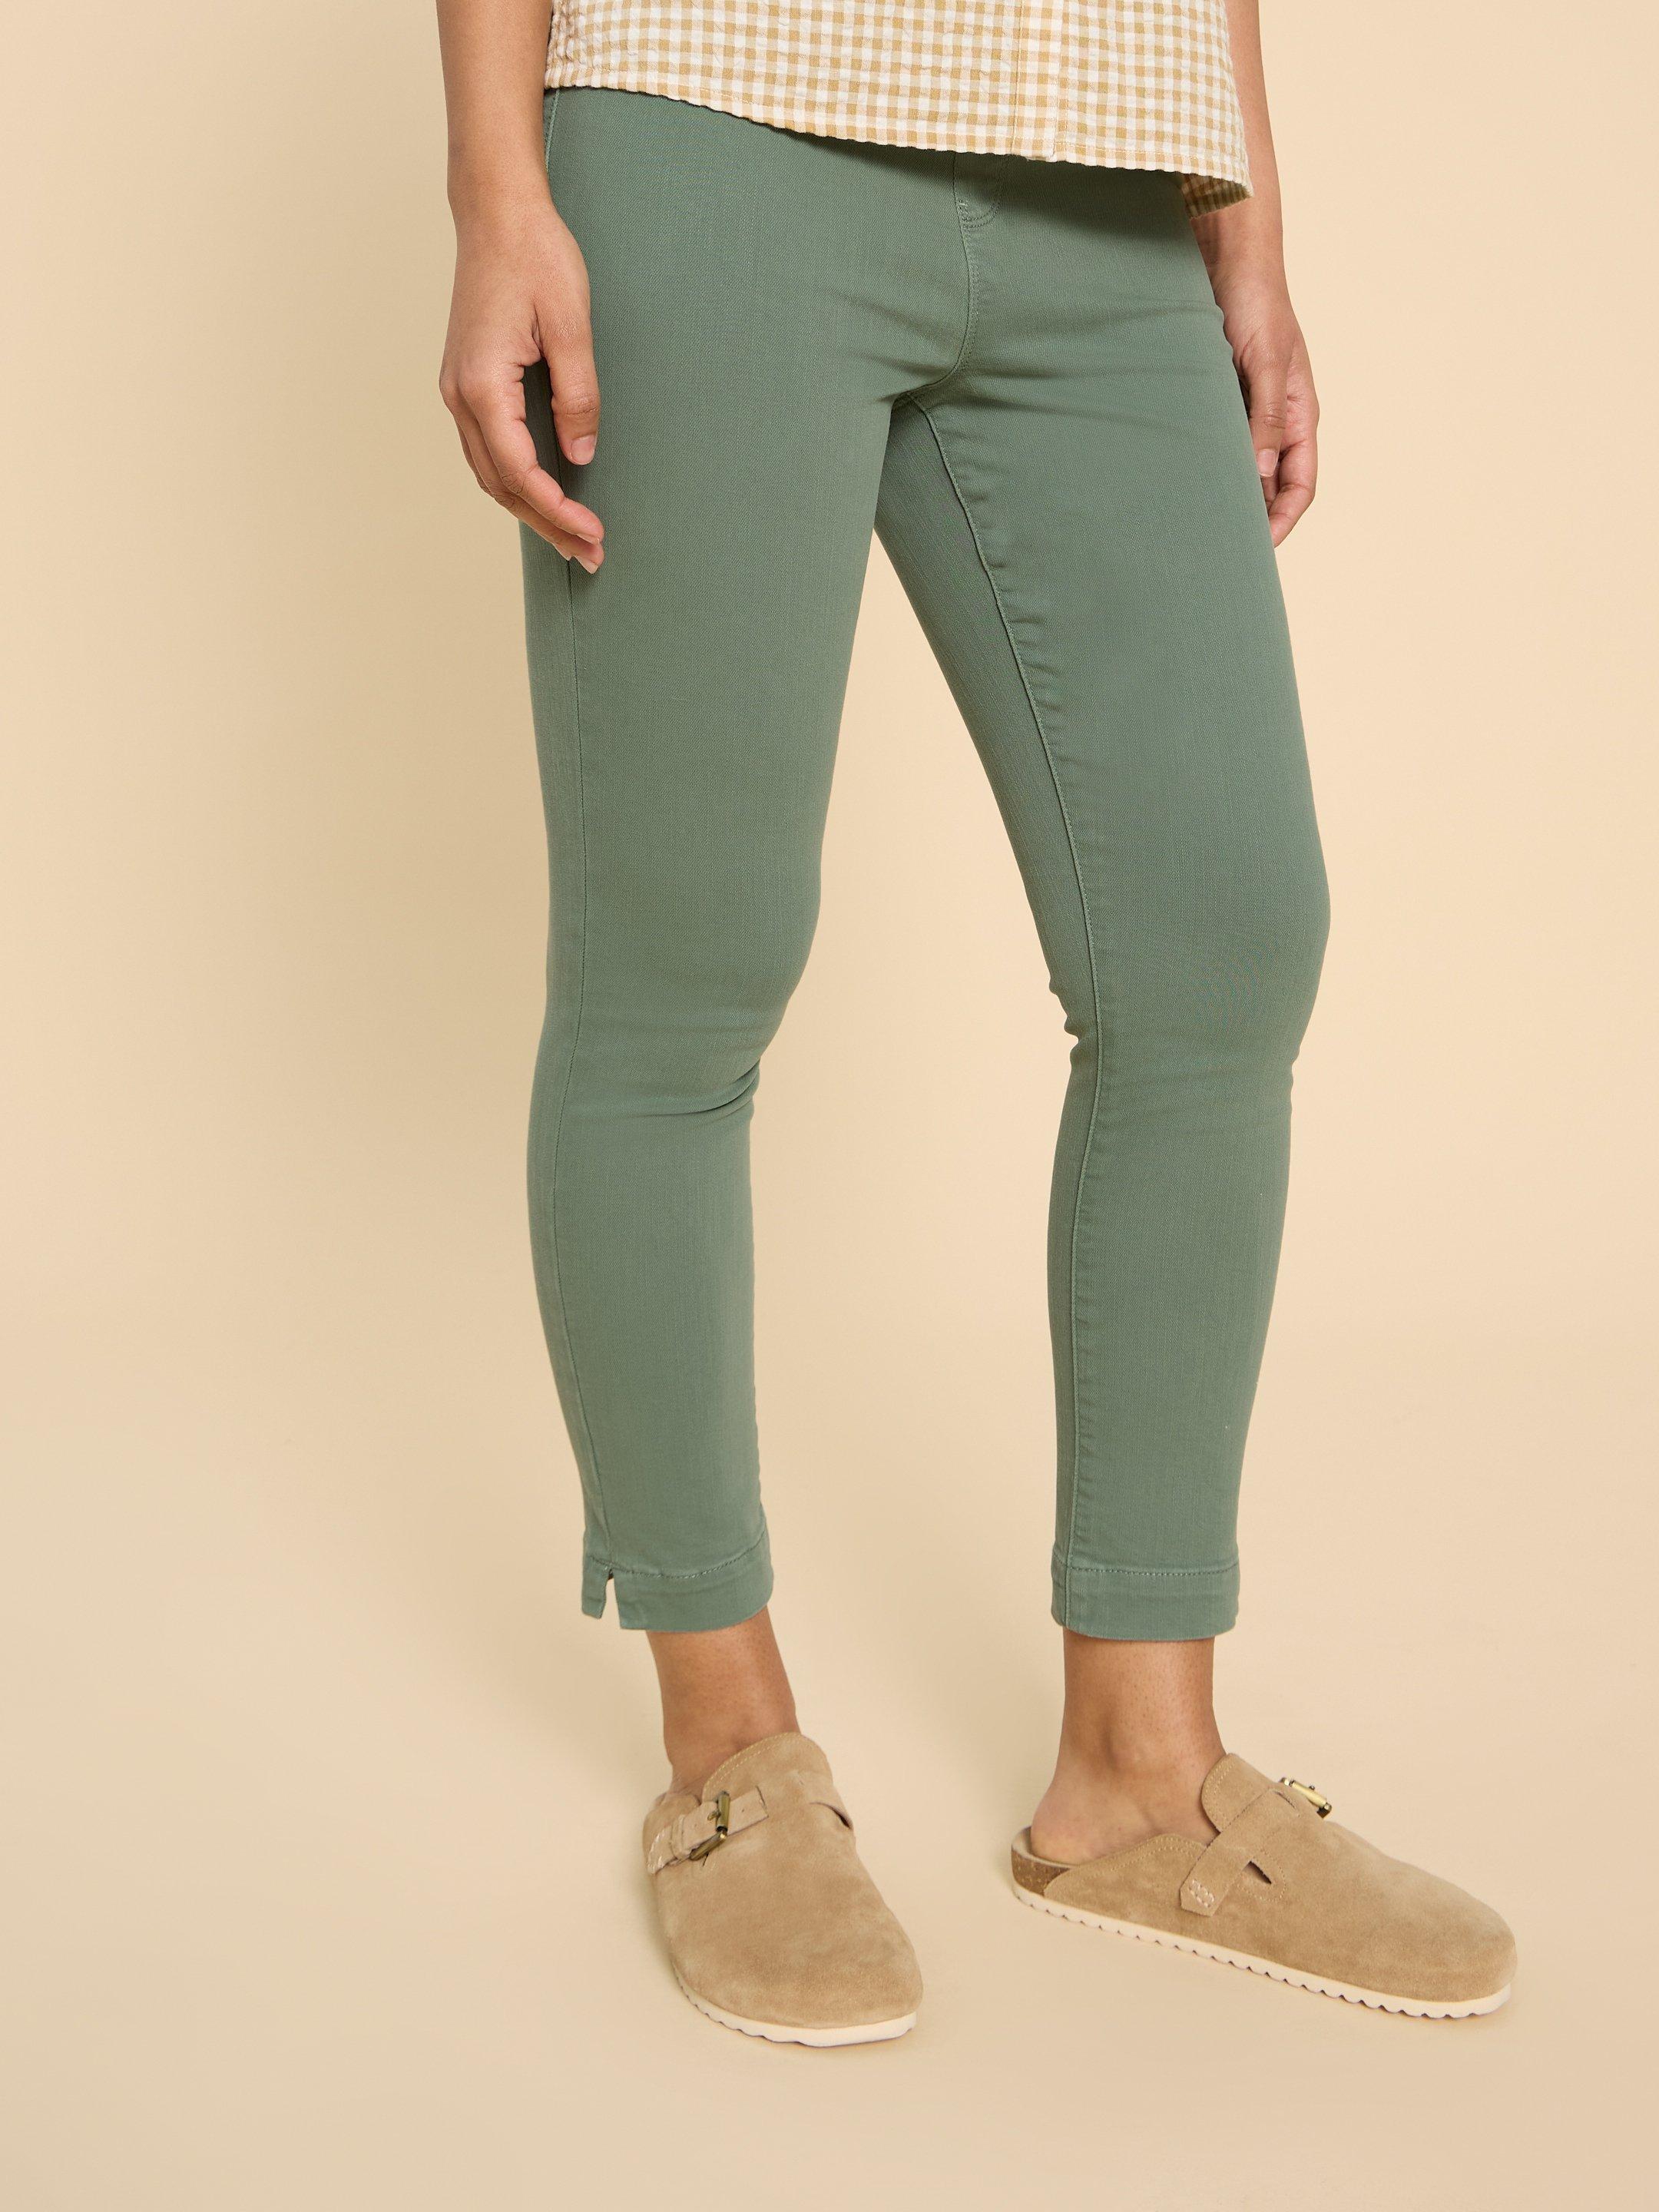 Janey Cotton Cropped Jegging